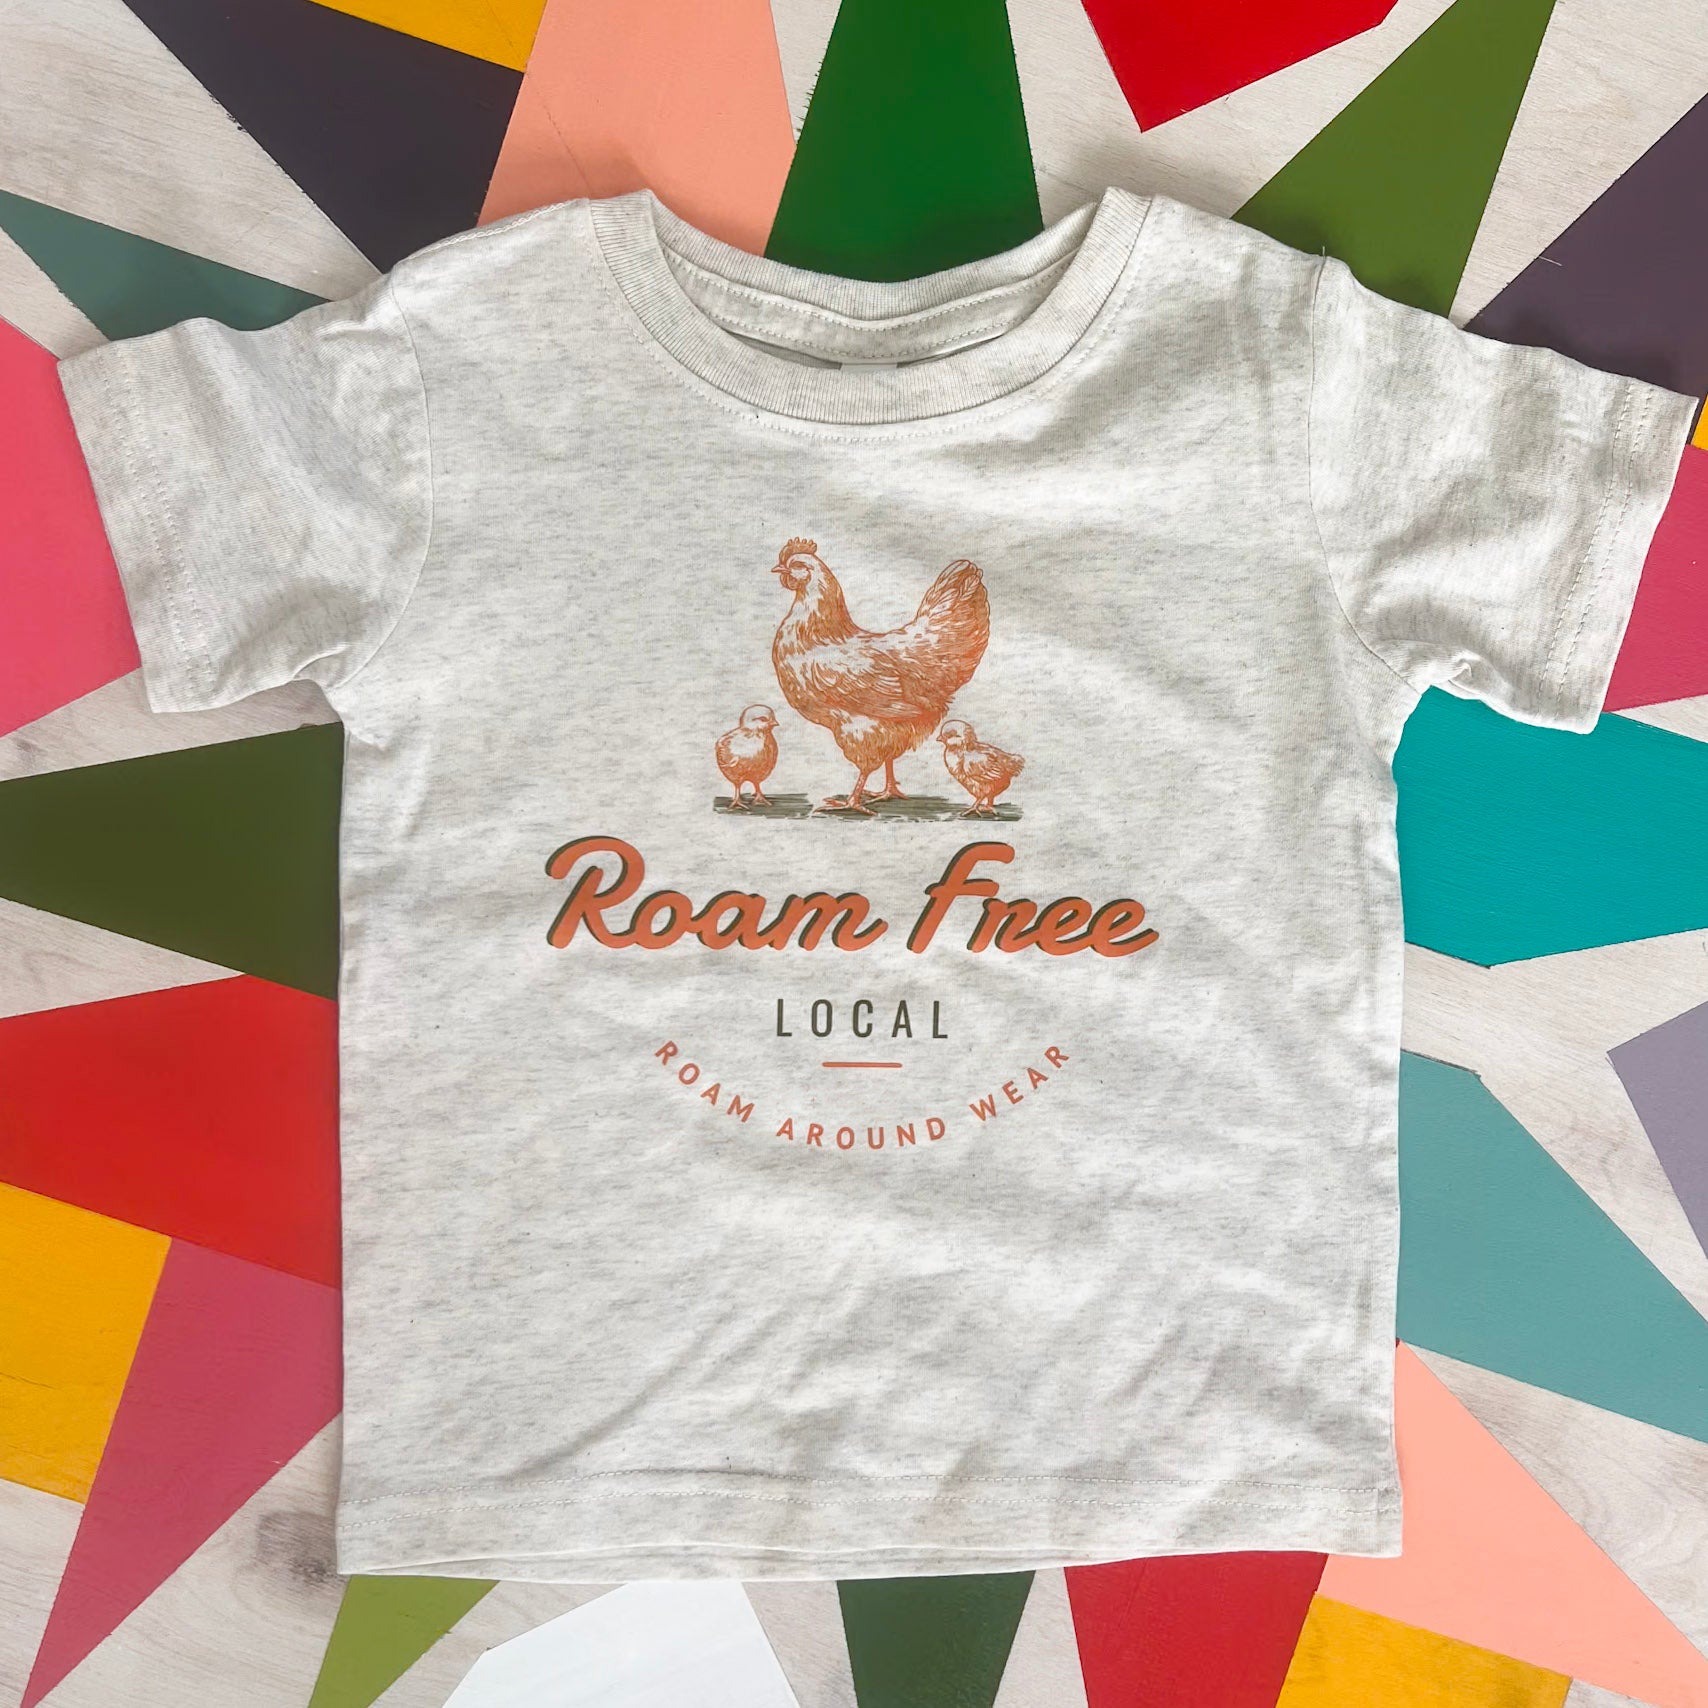 Roam Free Chicken Shirt. Toddler Shirt. Roam Around Wear is a Wyoming t-shirt company based out of Gillette, Wyoming